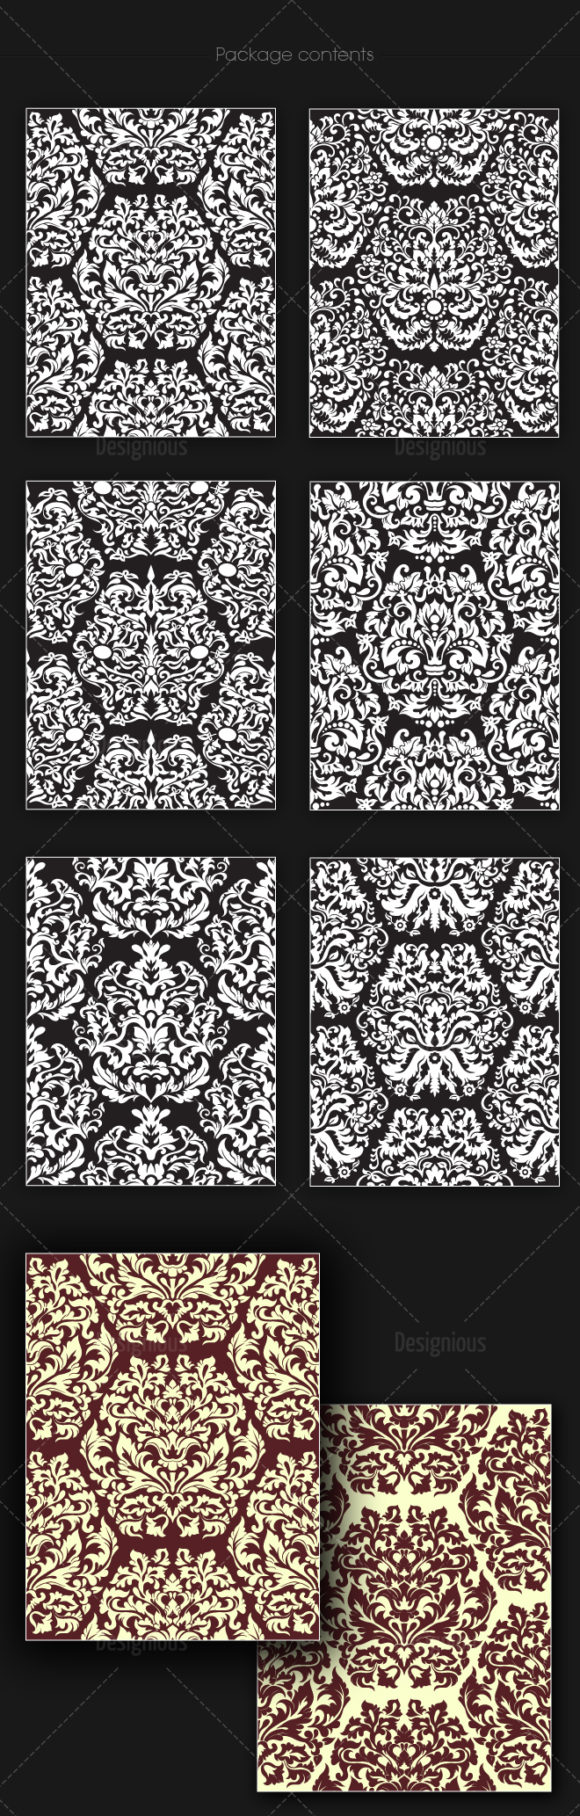 Seamless Patterns Vector Pack 150 2